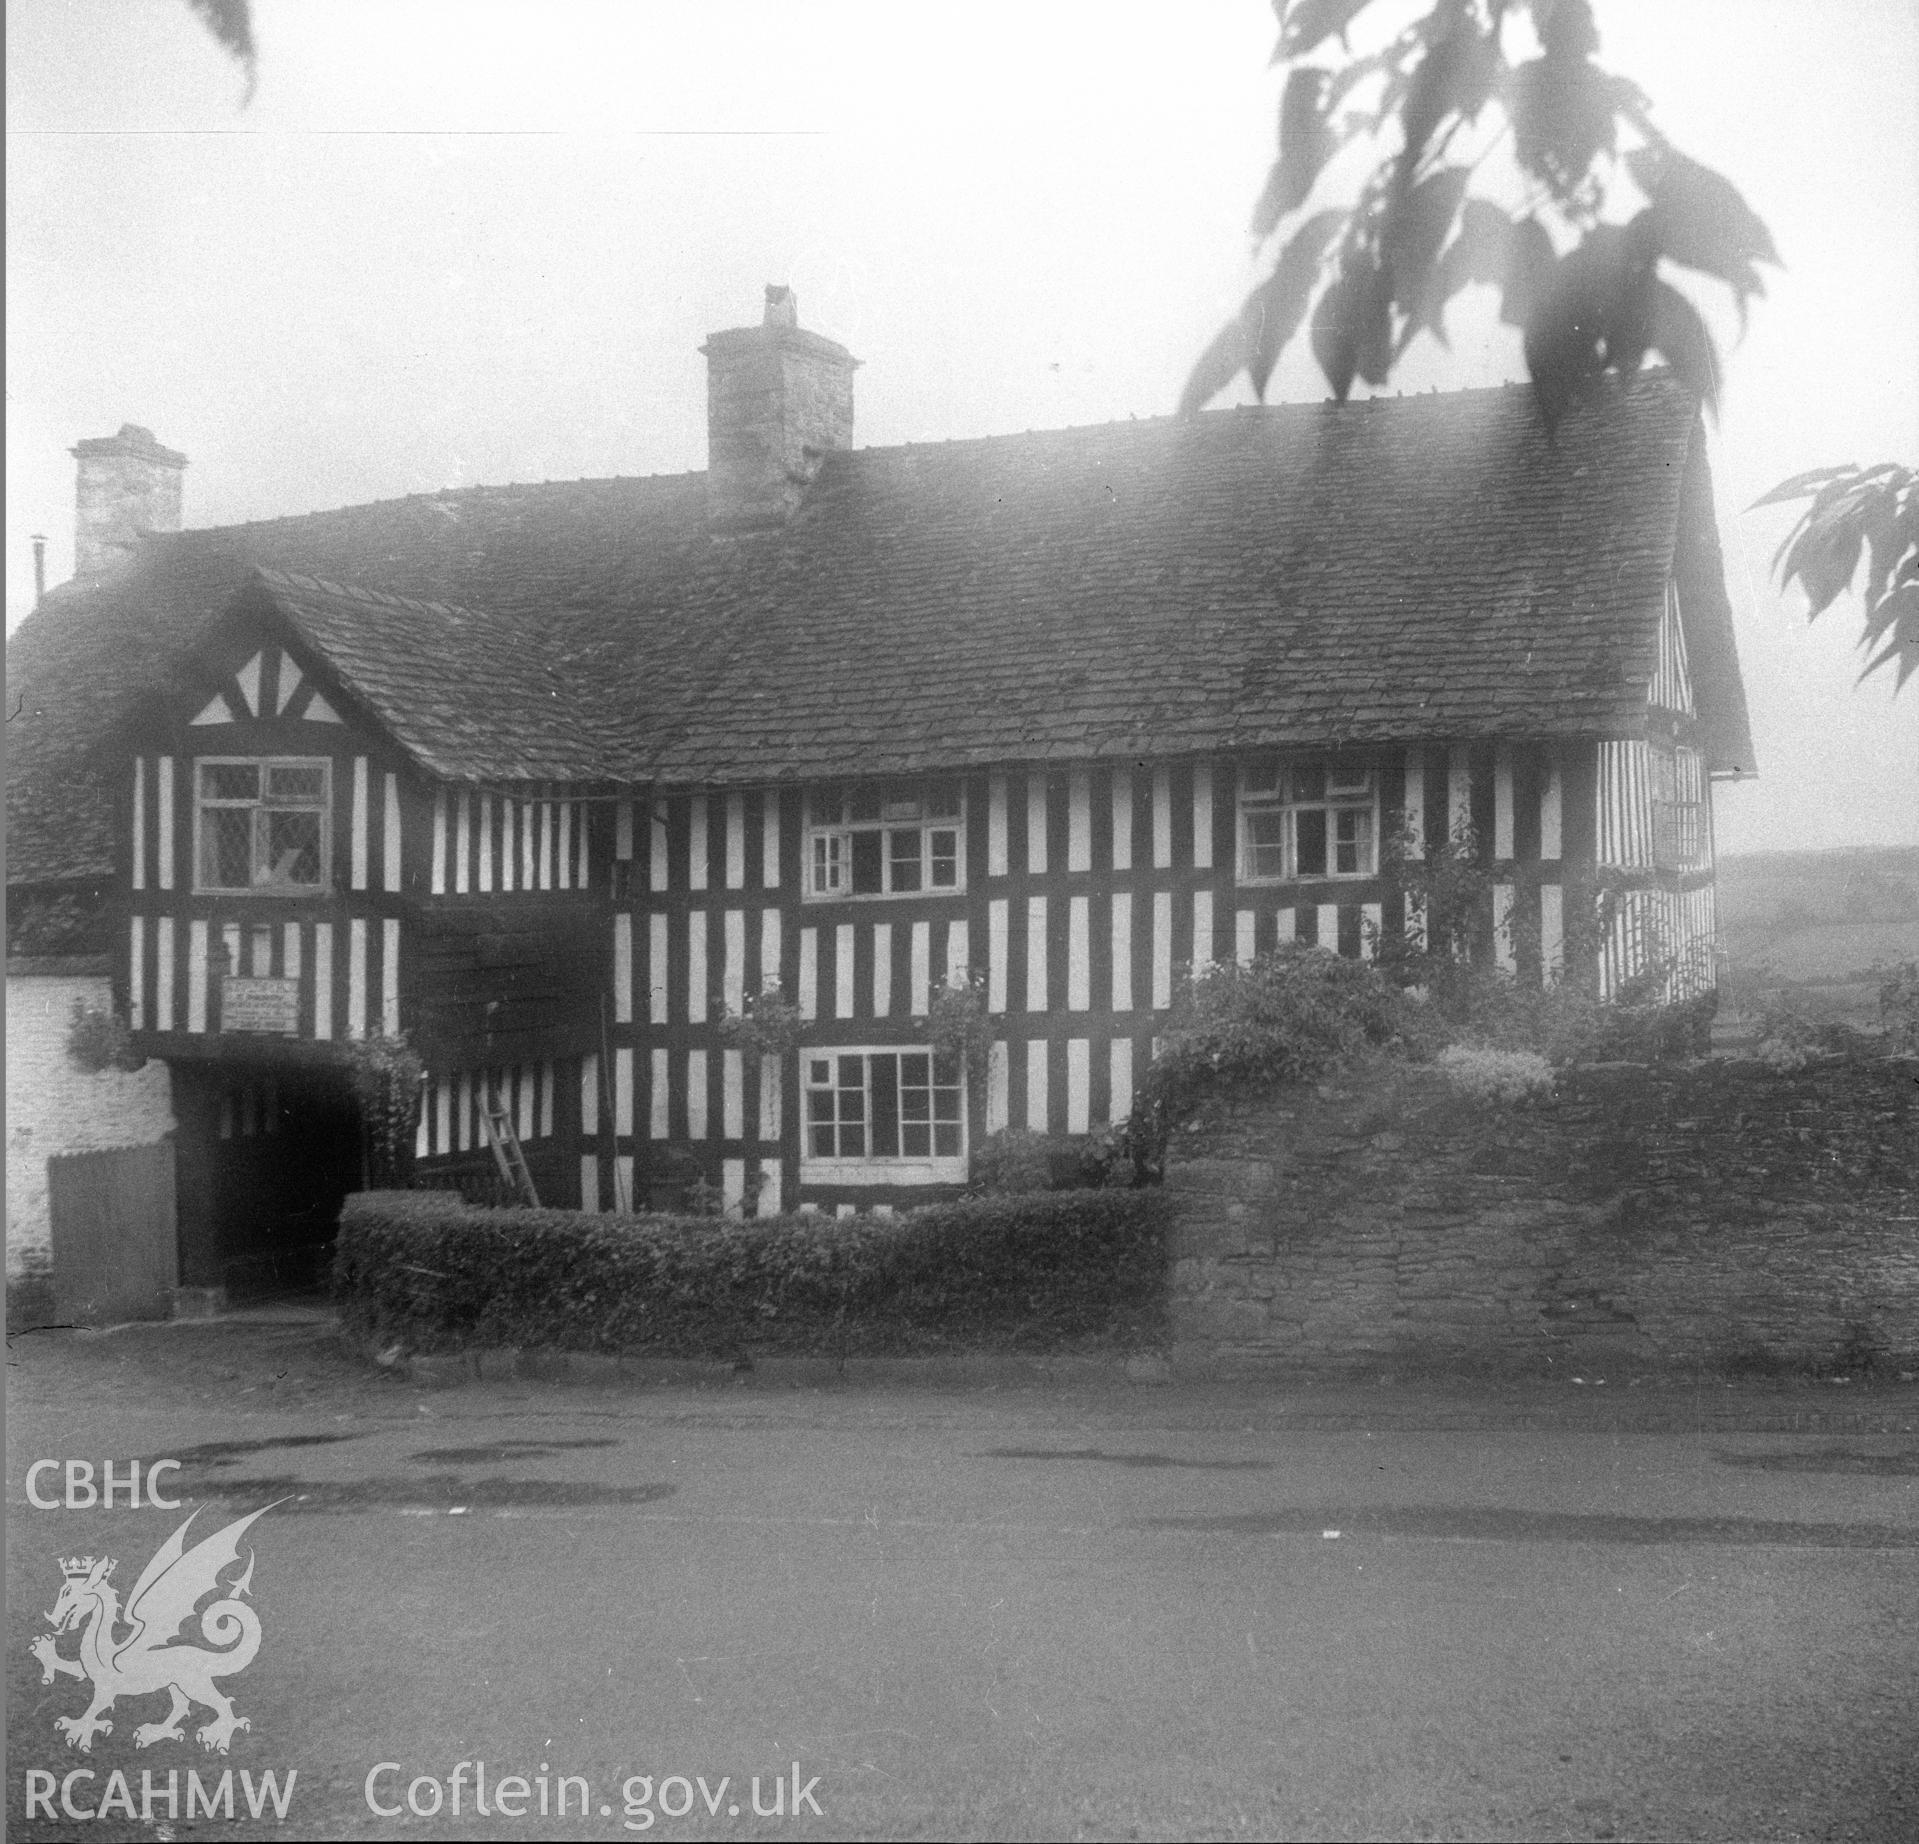 Digital copy of a nitrate negative showing exterior view of Rhydspence, Whitney on Wye, Hay on Wye.